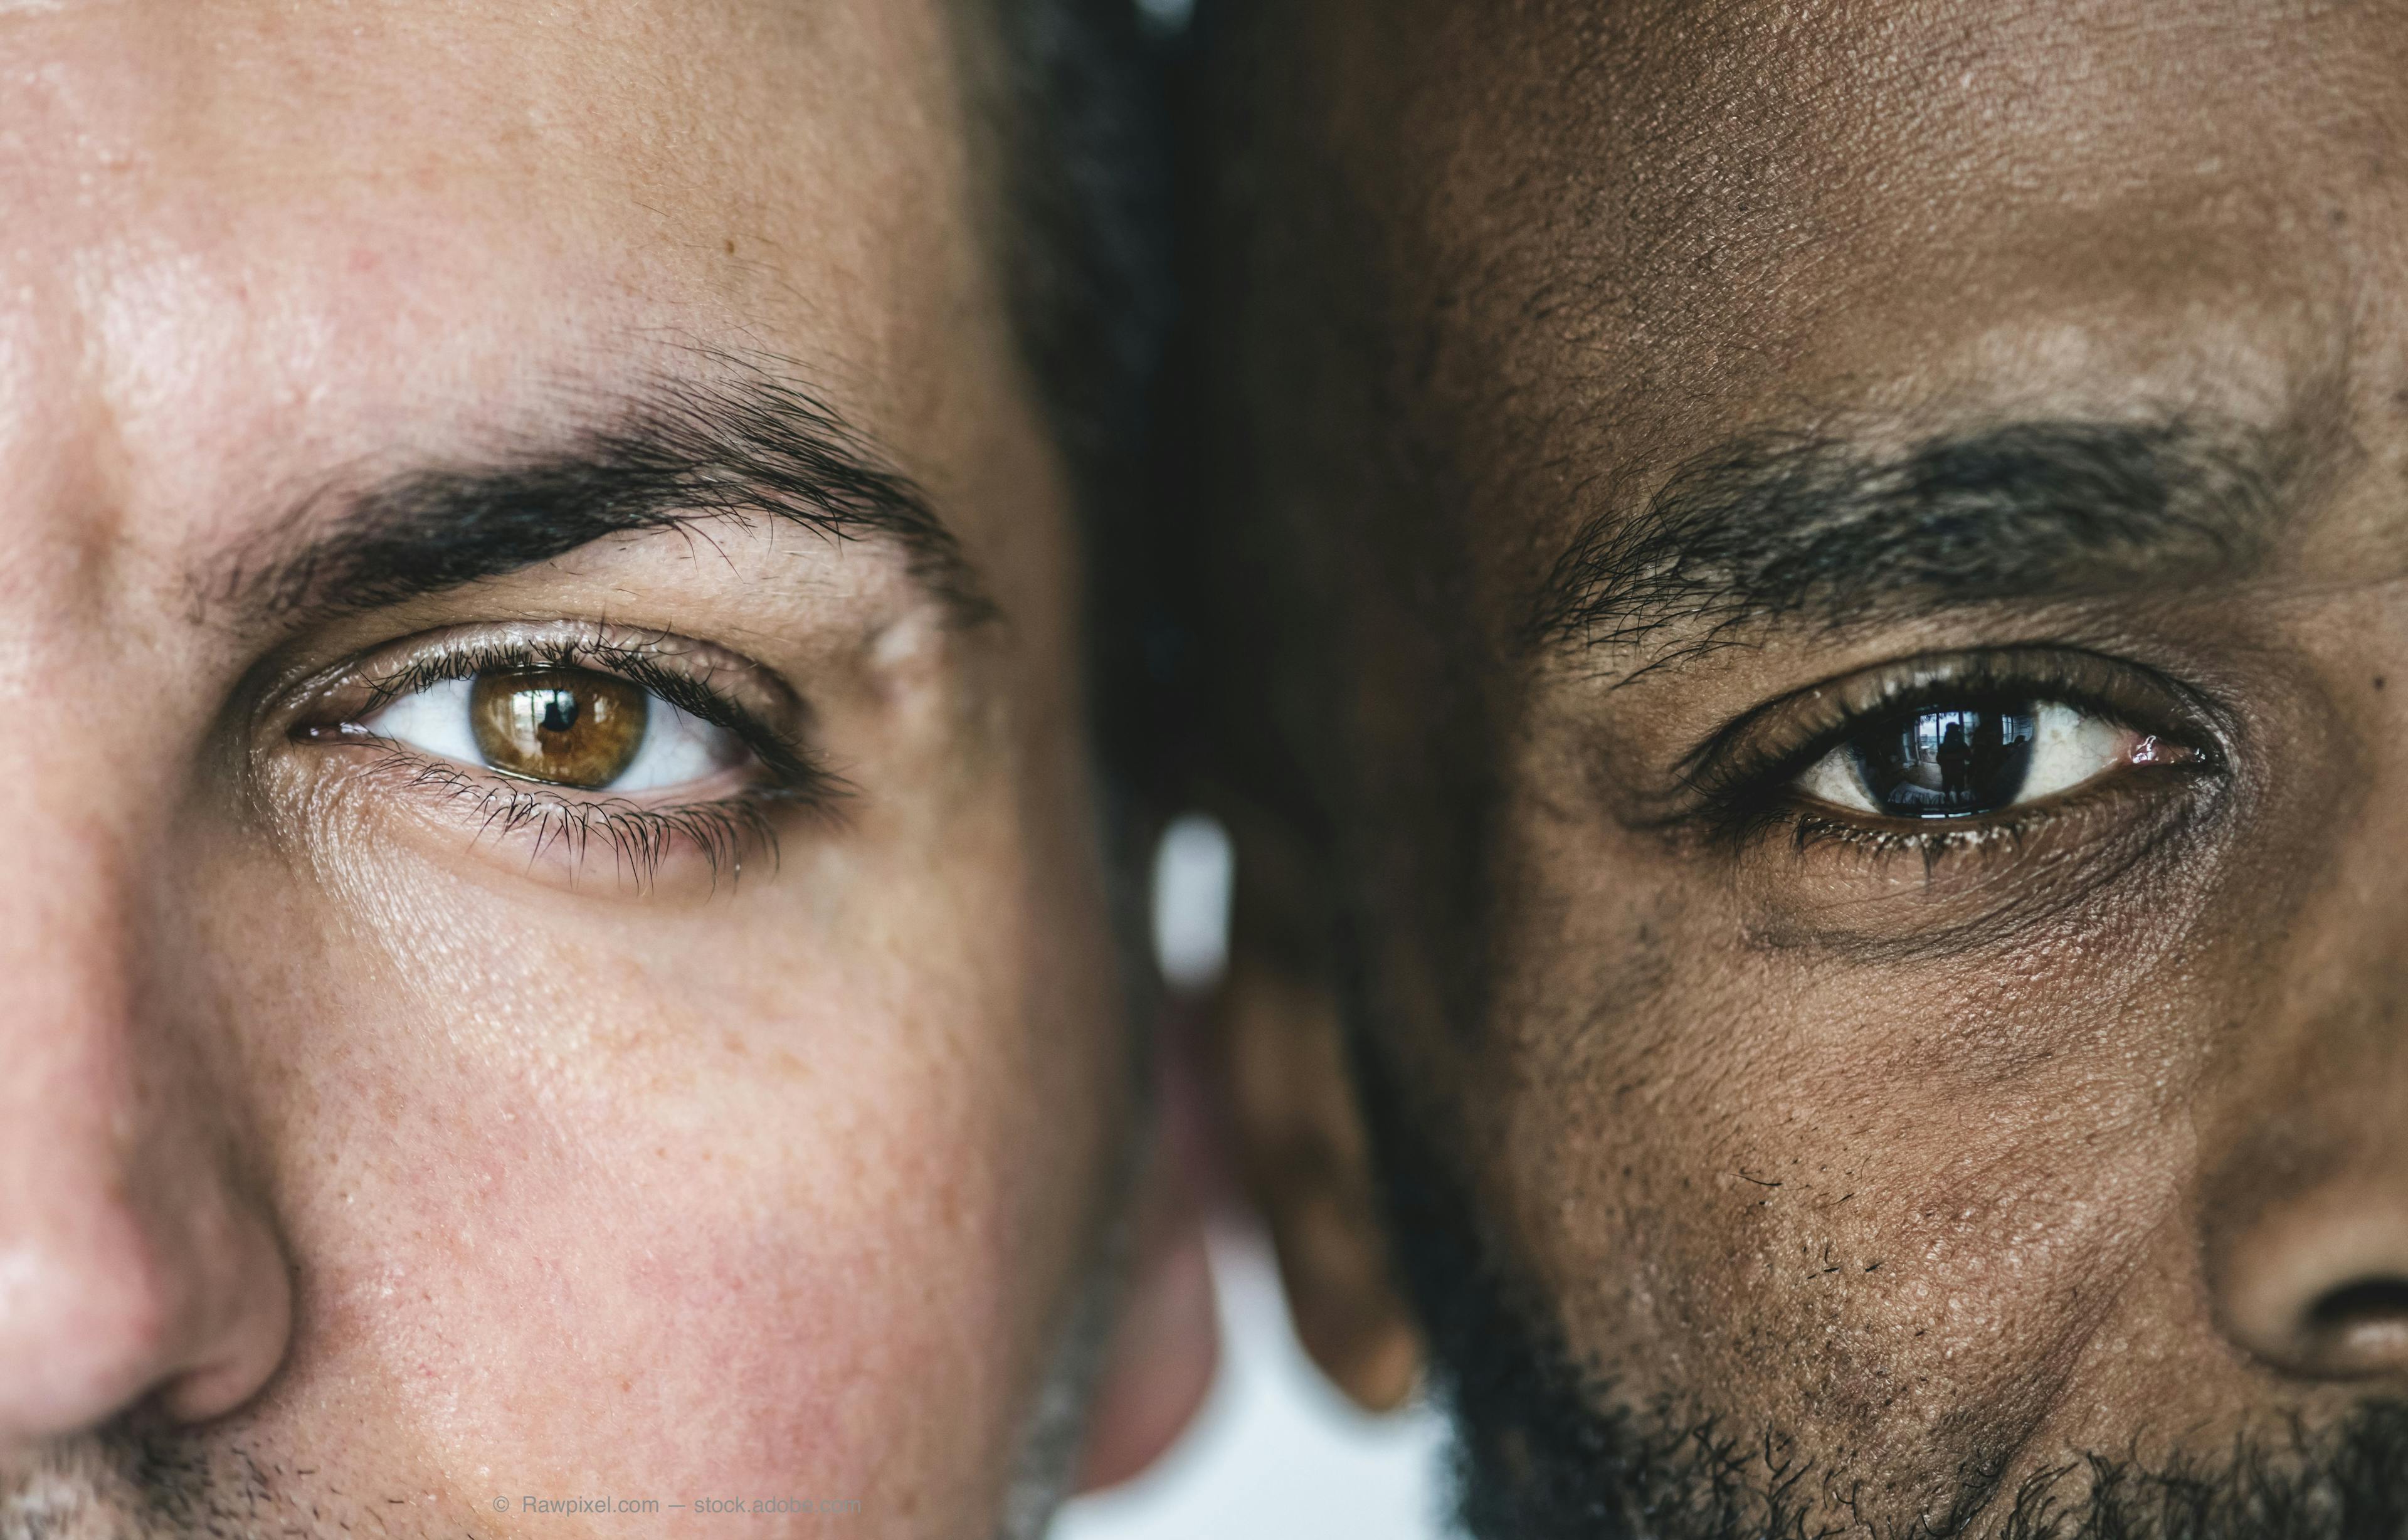 Pulling back the curtain on racial inequities in ocular health care